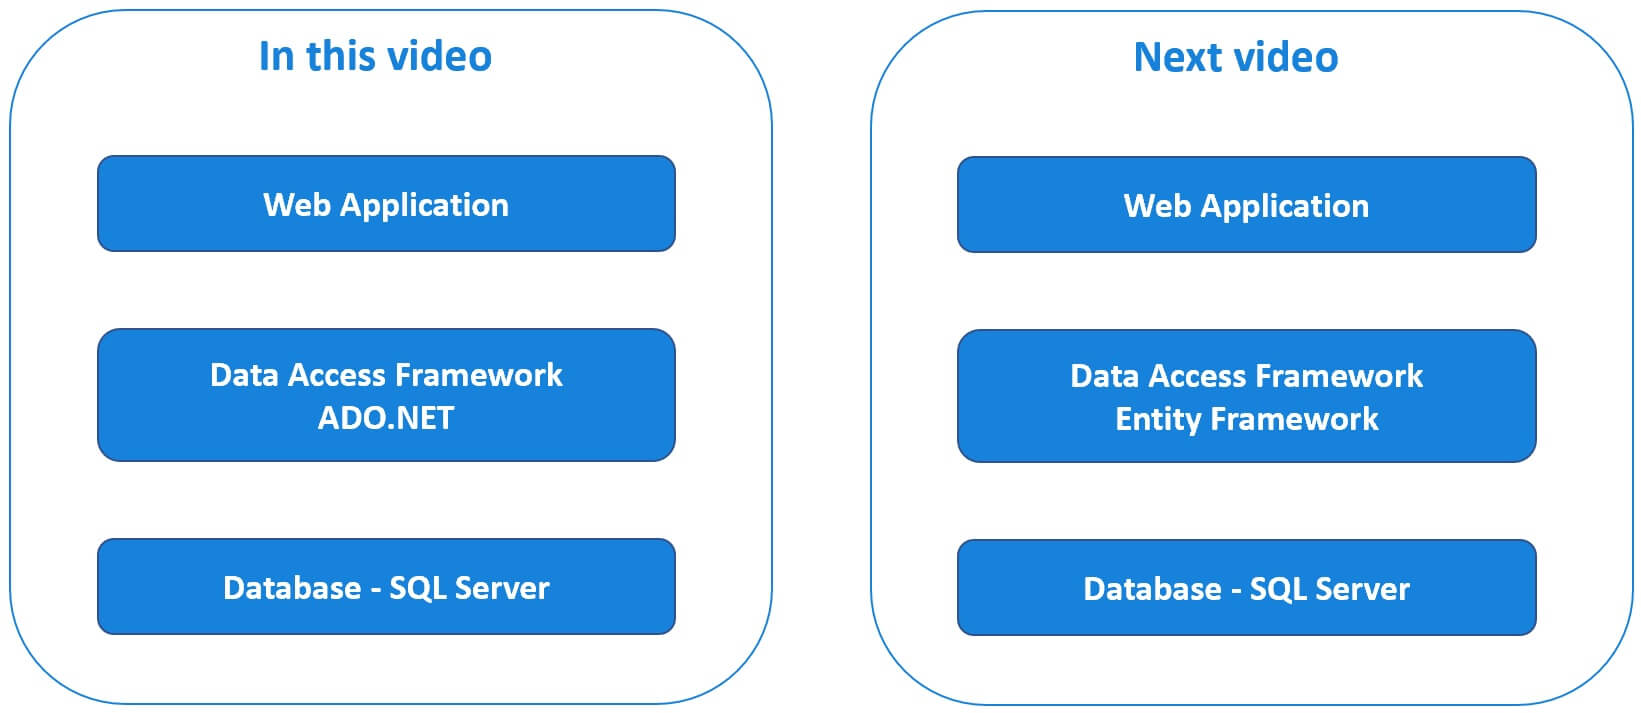 How To Deploy Web Application With Sql Database To Azure